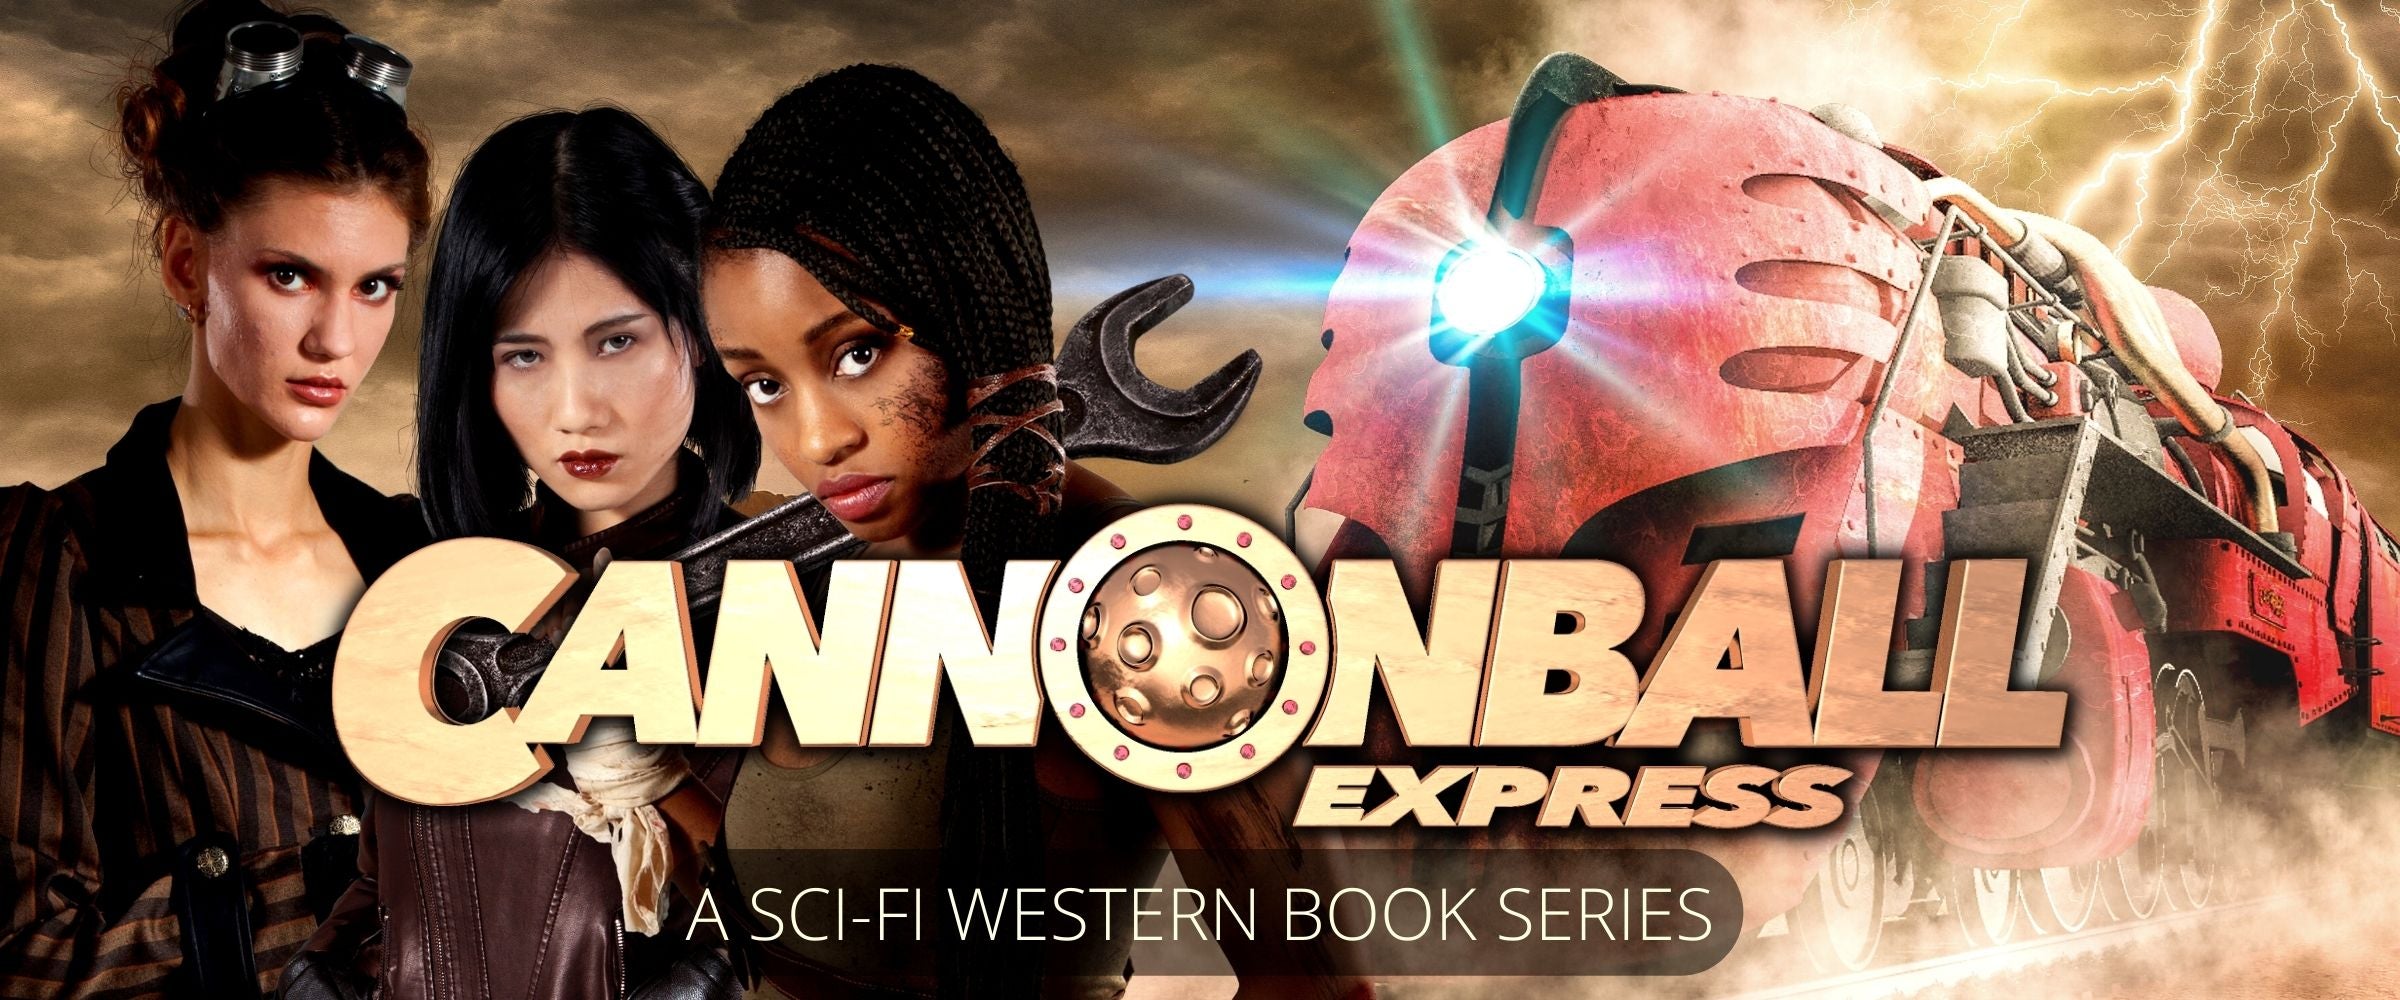 Image of a red sci-fi train thundering over the railroads of Mars, while lightning flashes and three determined young women - the heroes of the CANNONBALL EXPRESS sci-fi western book series - stand in the foreground, ready for action.